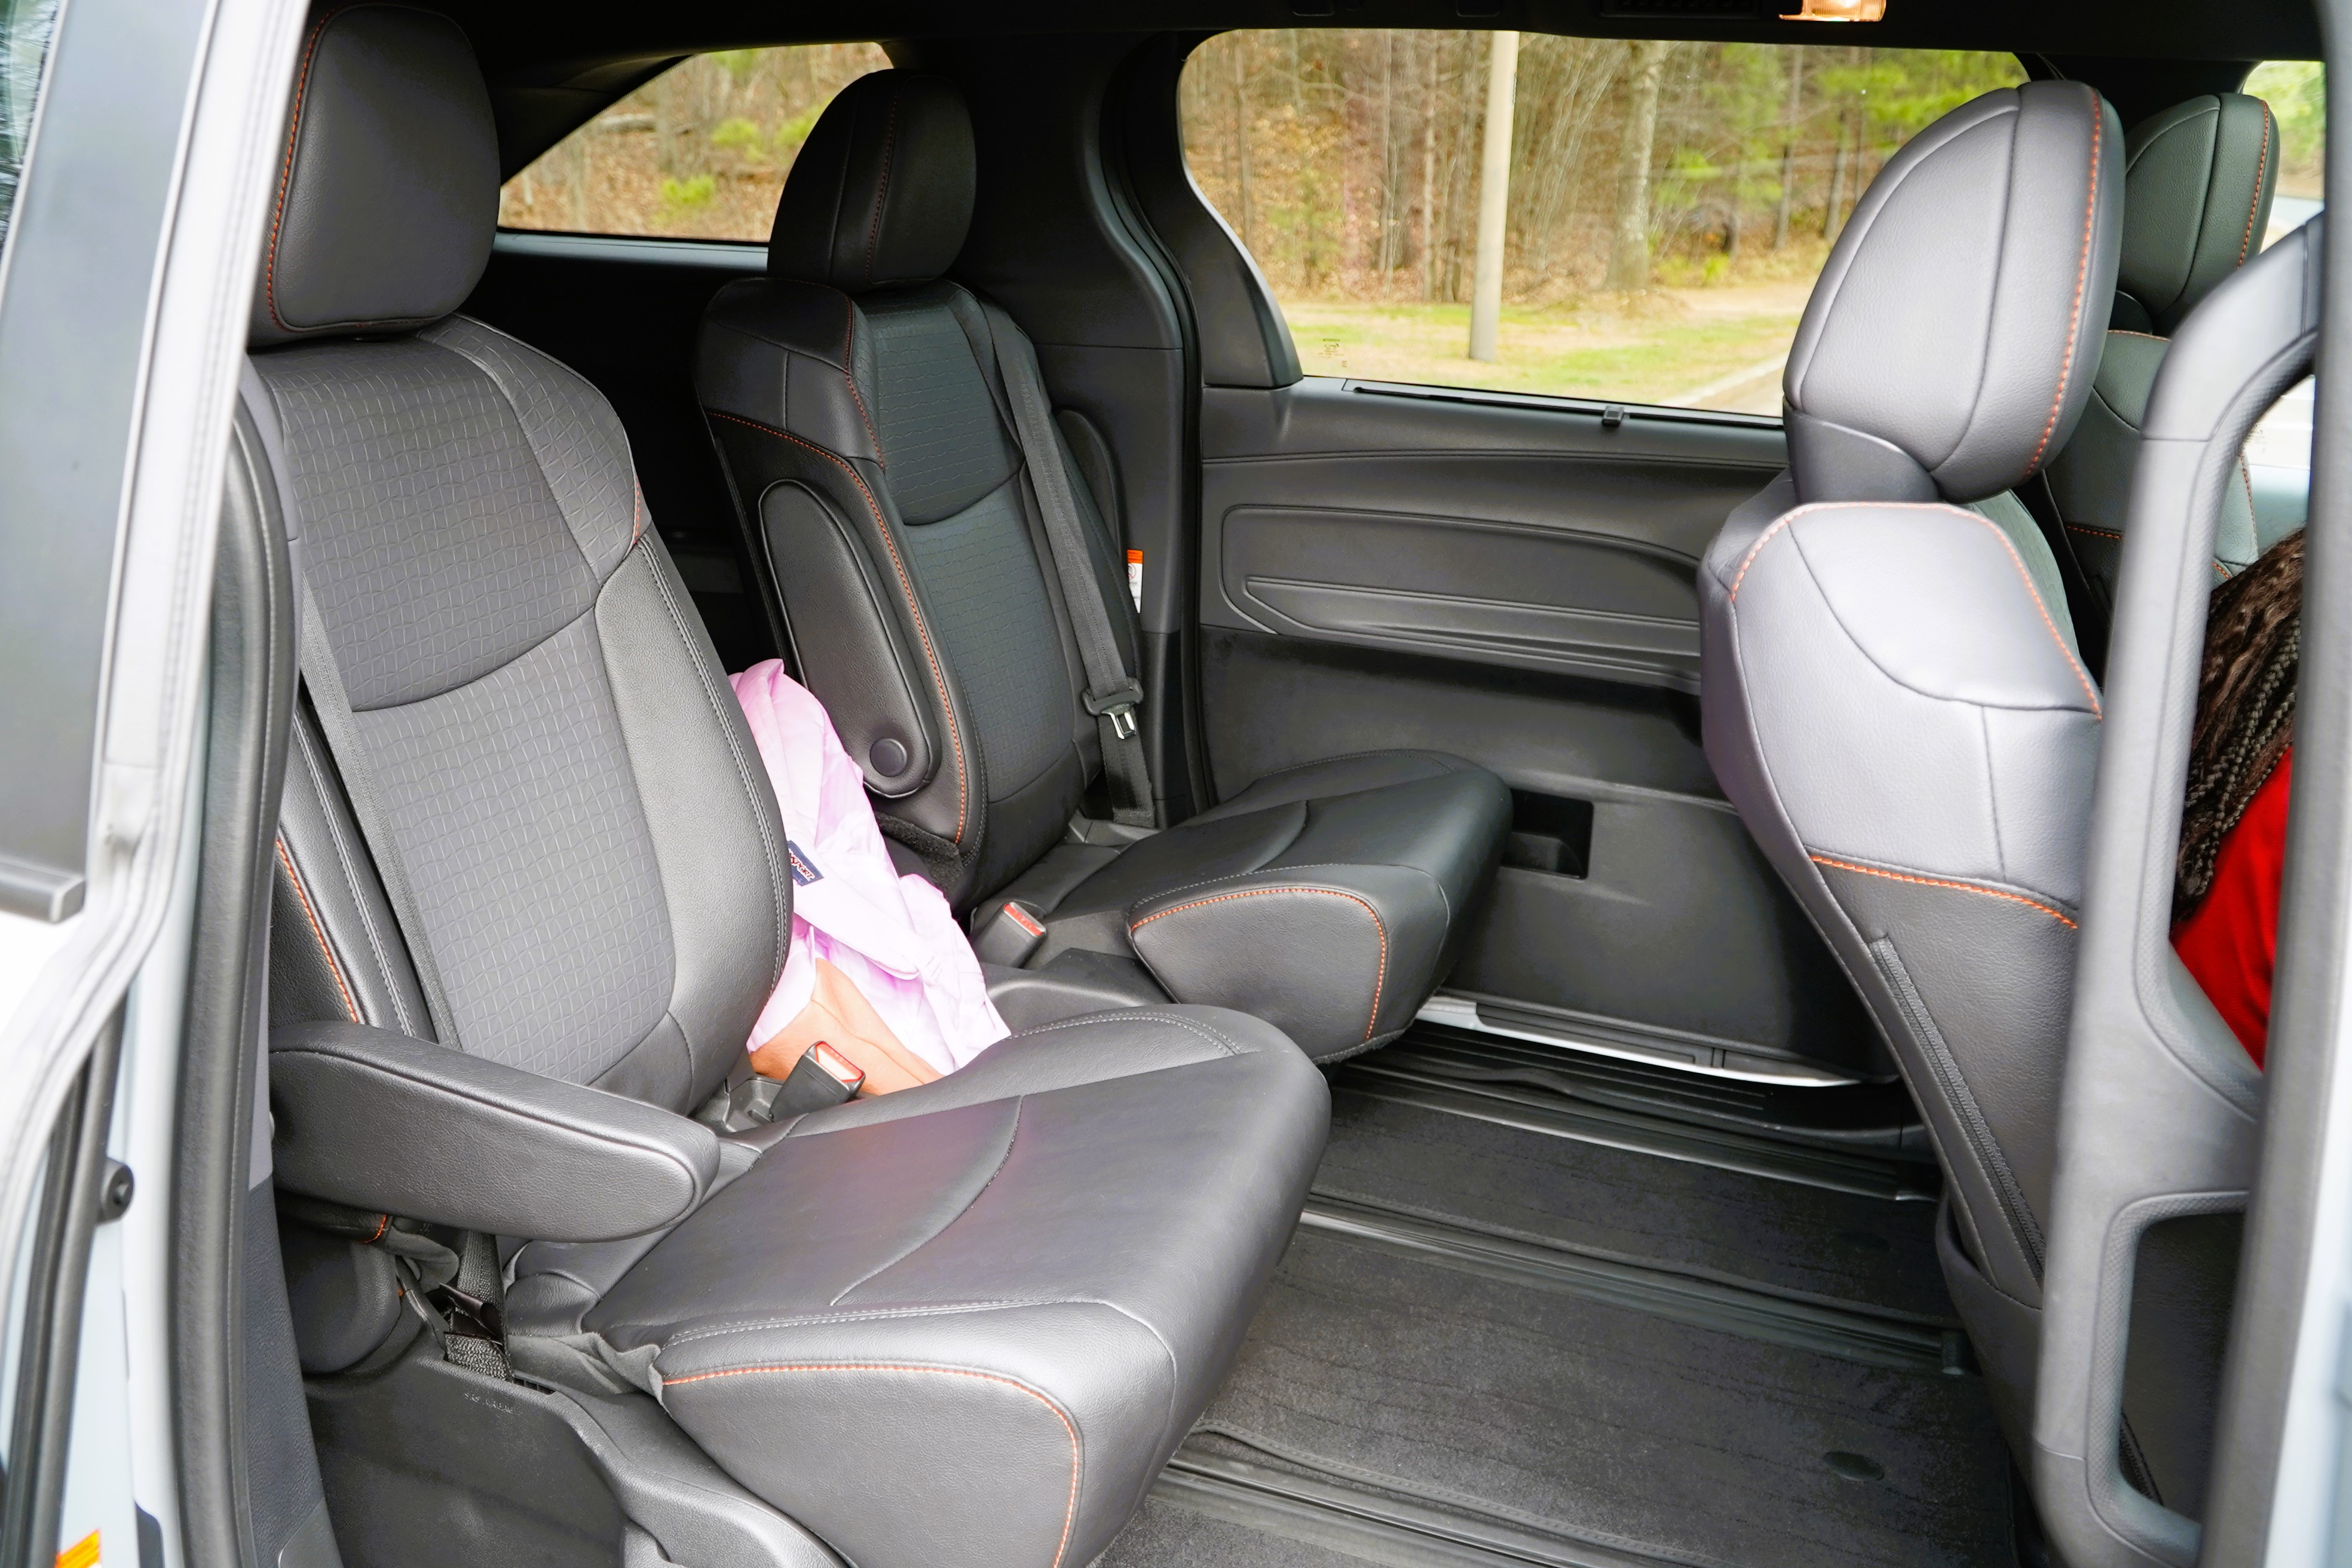 Backseat of the Toyota Sienna XSE